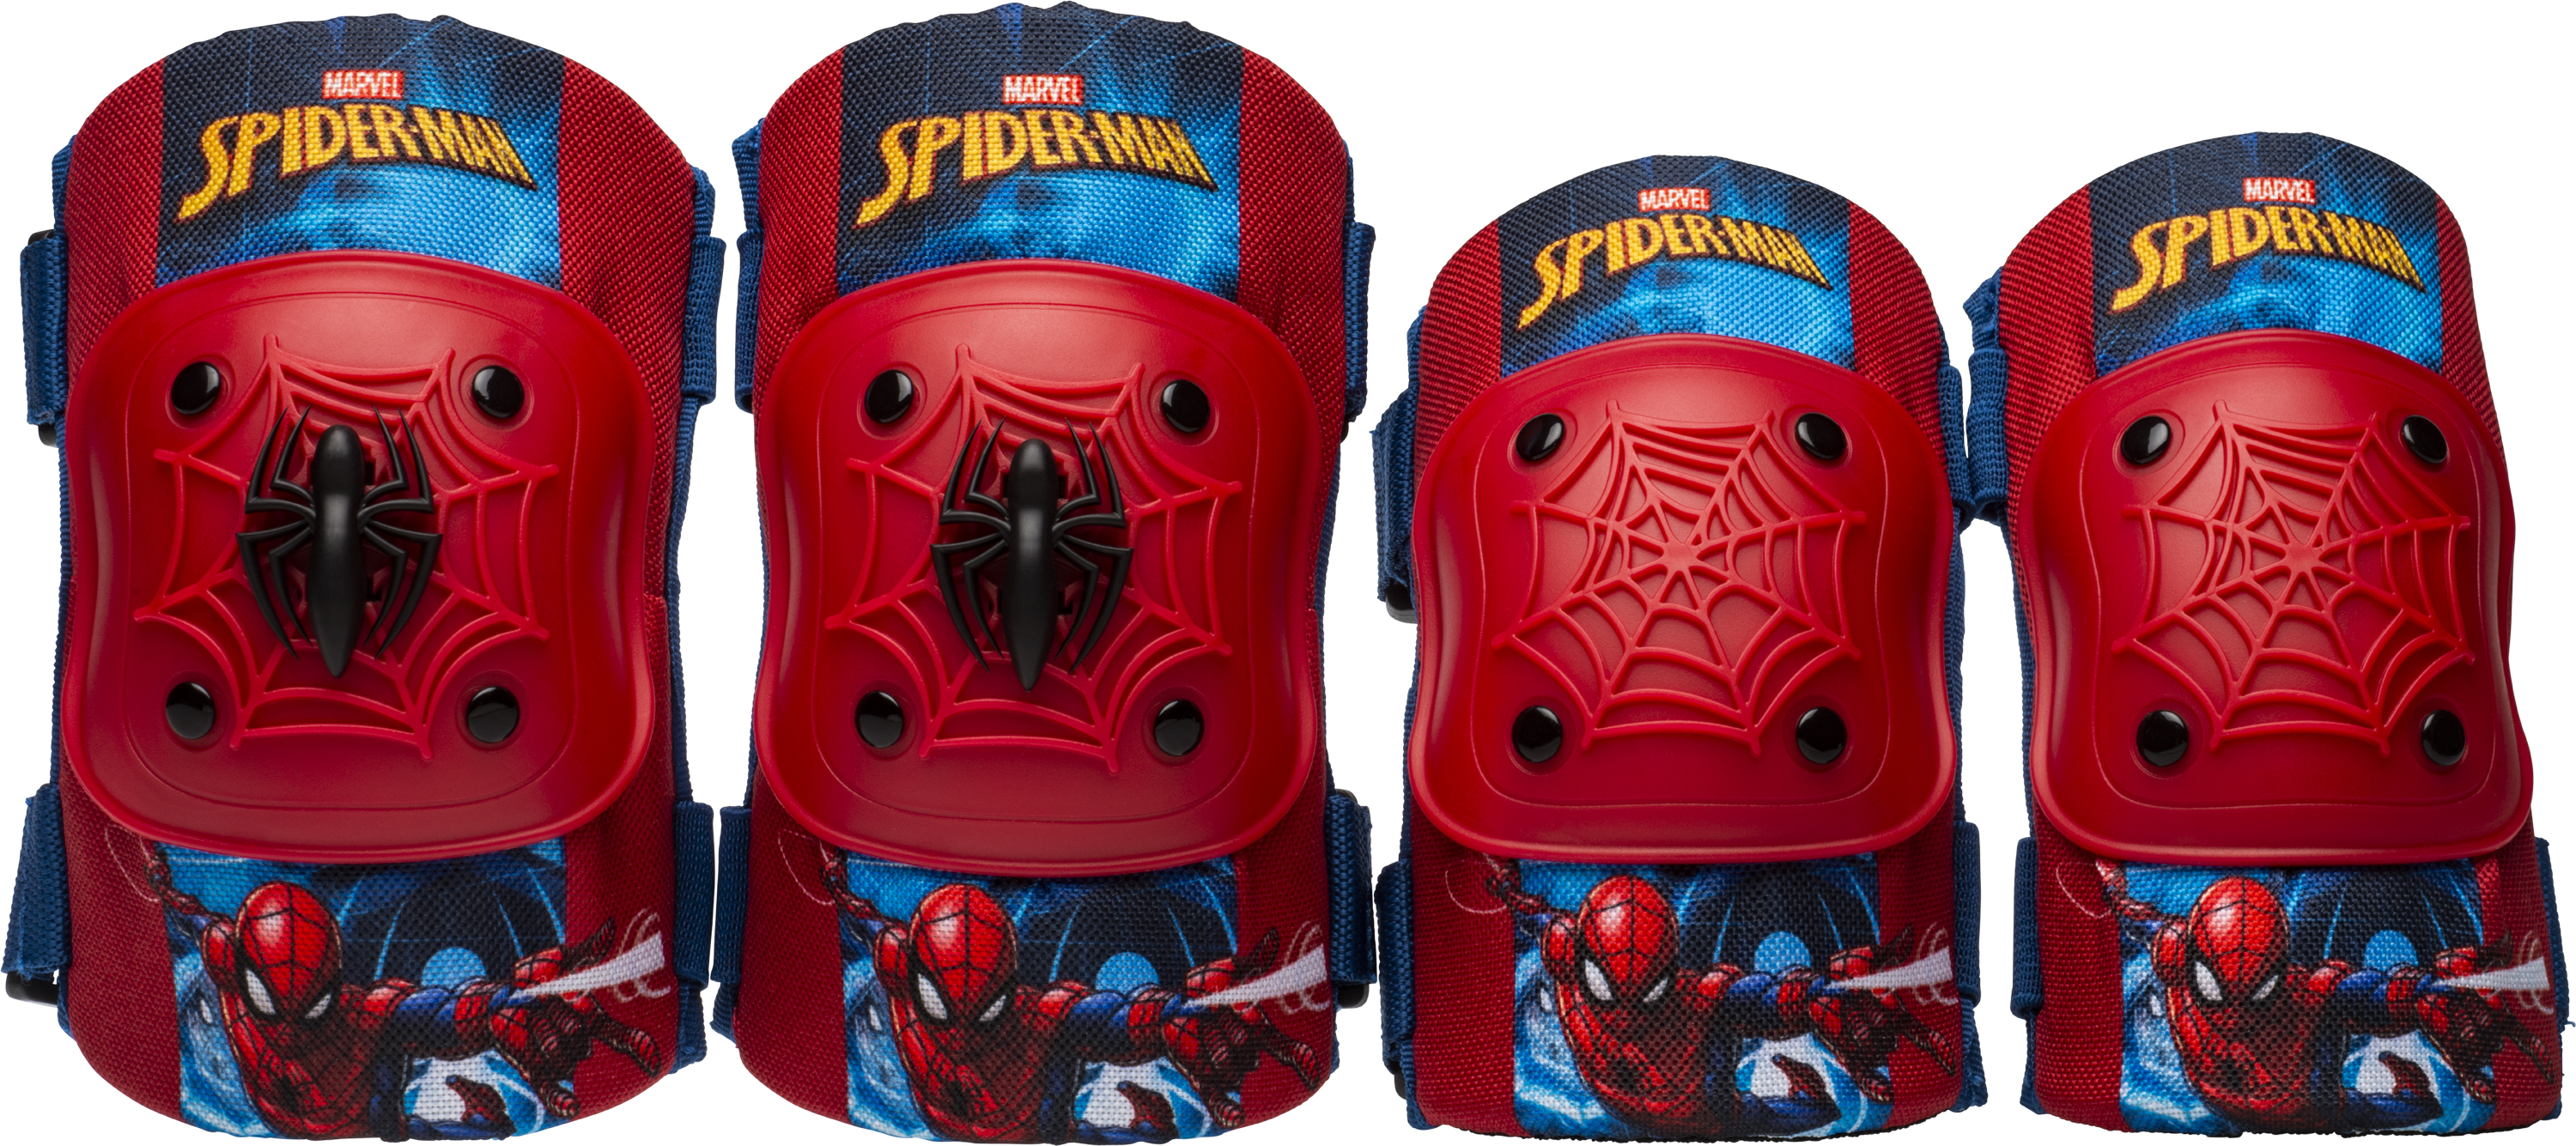 Bell Spiderman Elbow & Knee Pad Set with Bike Bell Value Pack - image 1 of 5